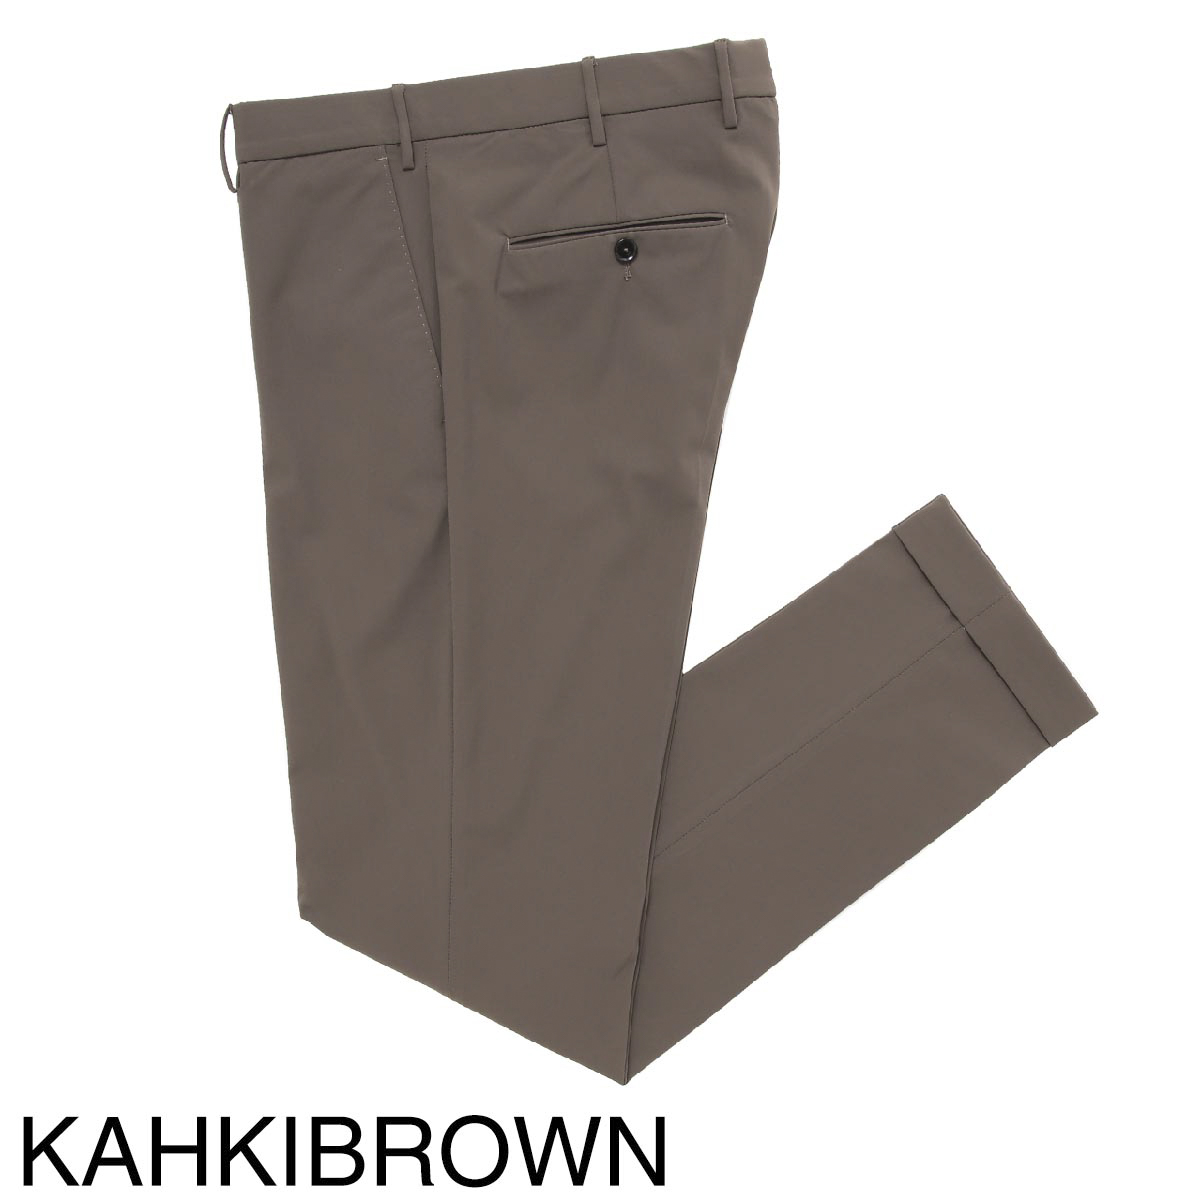 PT Torino Trouser in Dark Brown Mens Clothing Trousers Grey for Men Slacks and Chinos Casual trousers and trousers 